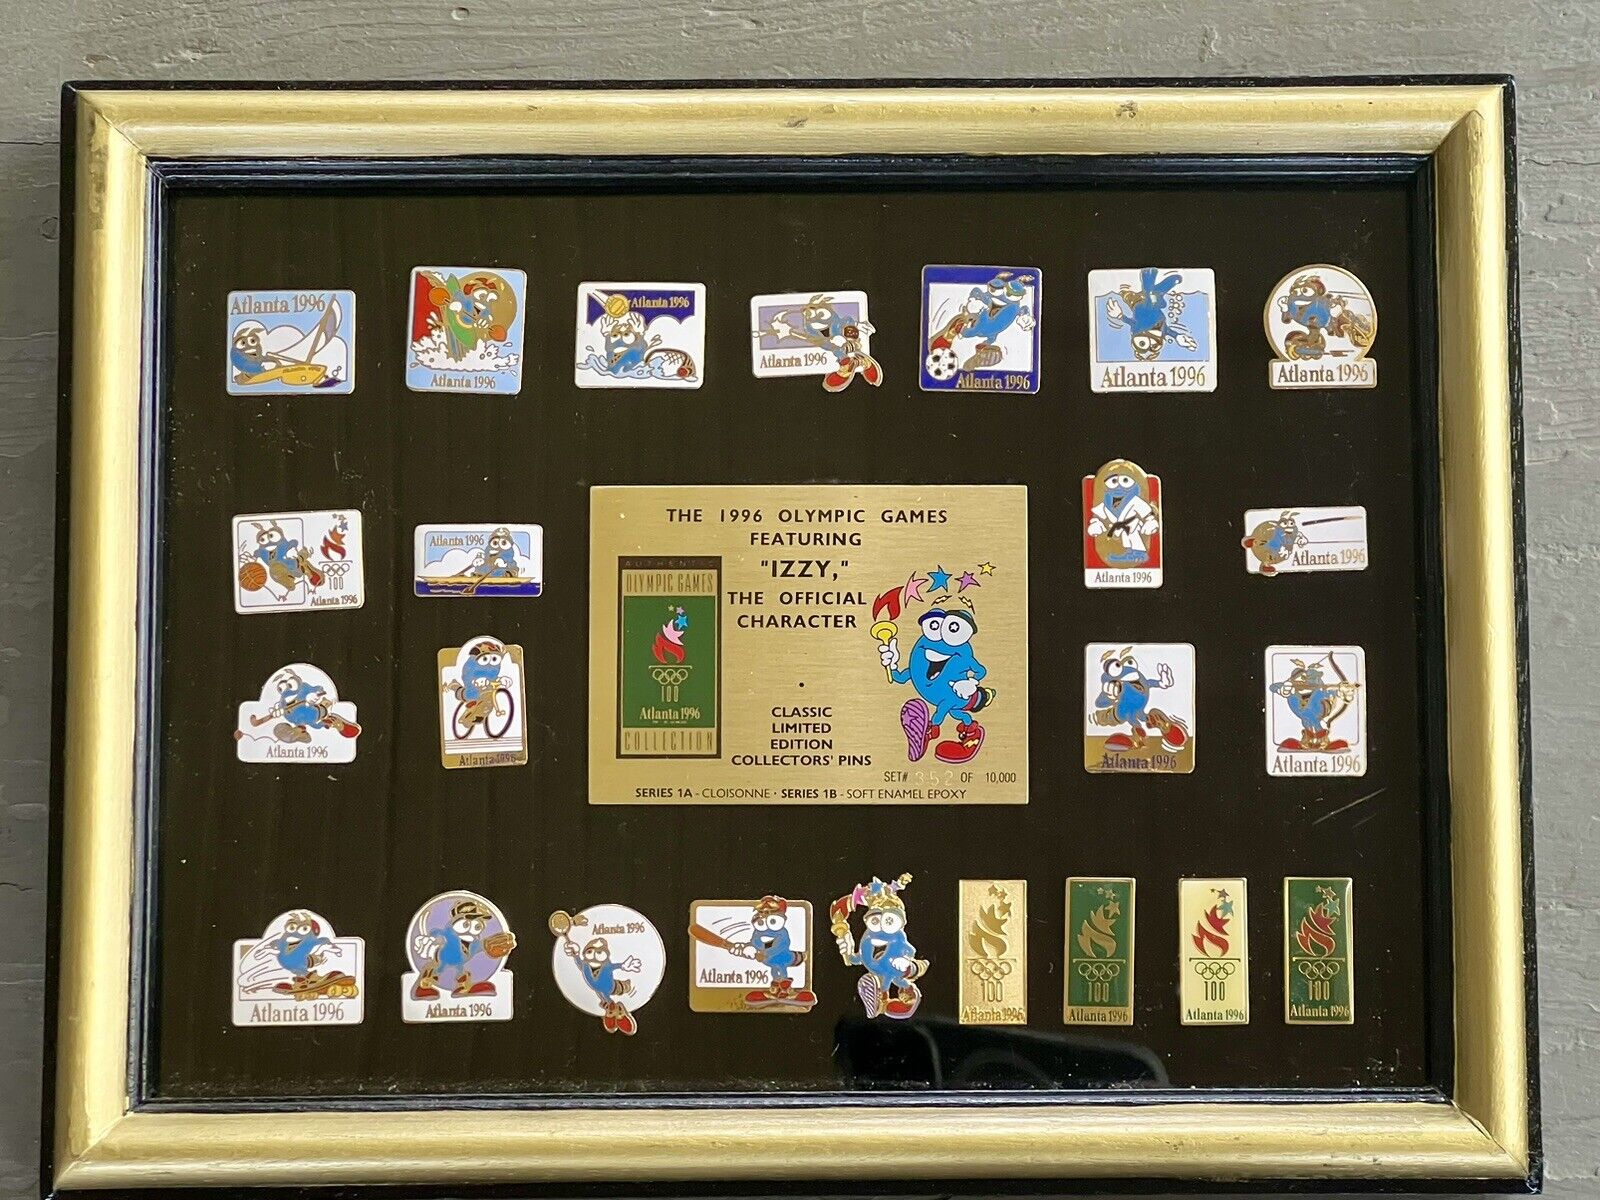 USA TEAM ATLANTA 1996 OLYMPIC GAMES IZZY OLYMPIAD  PIN COLLECTION framed